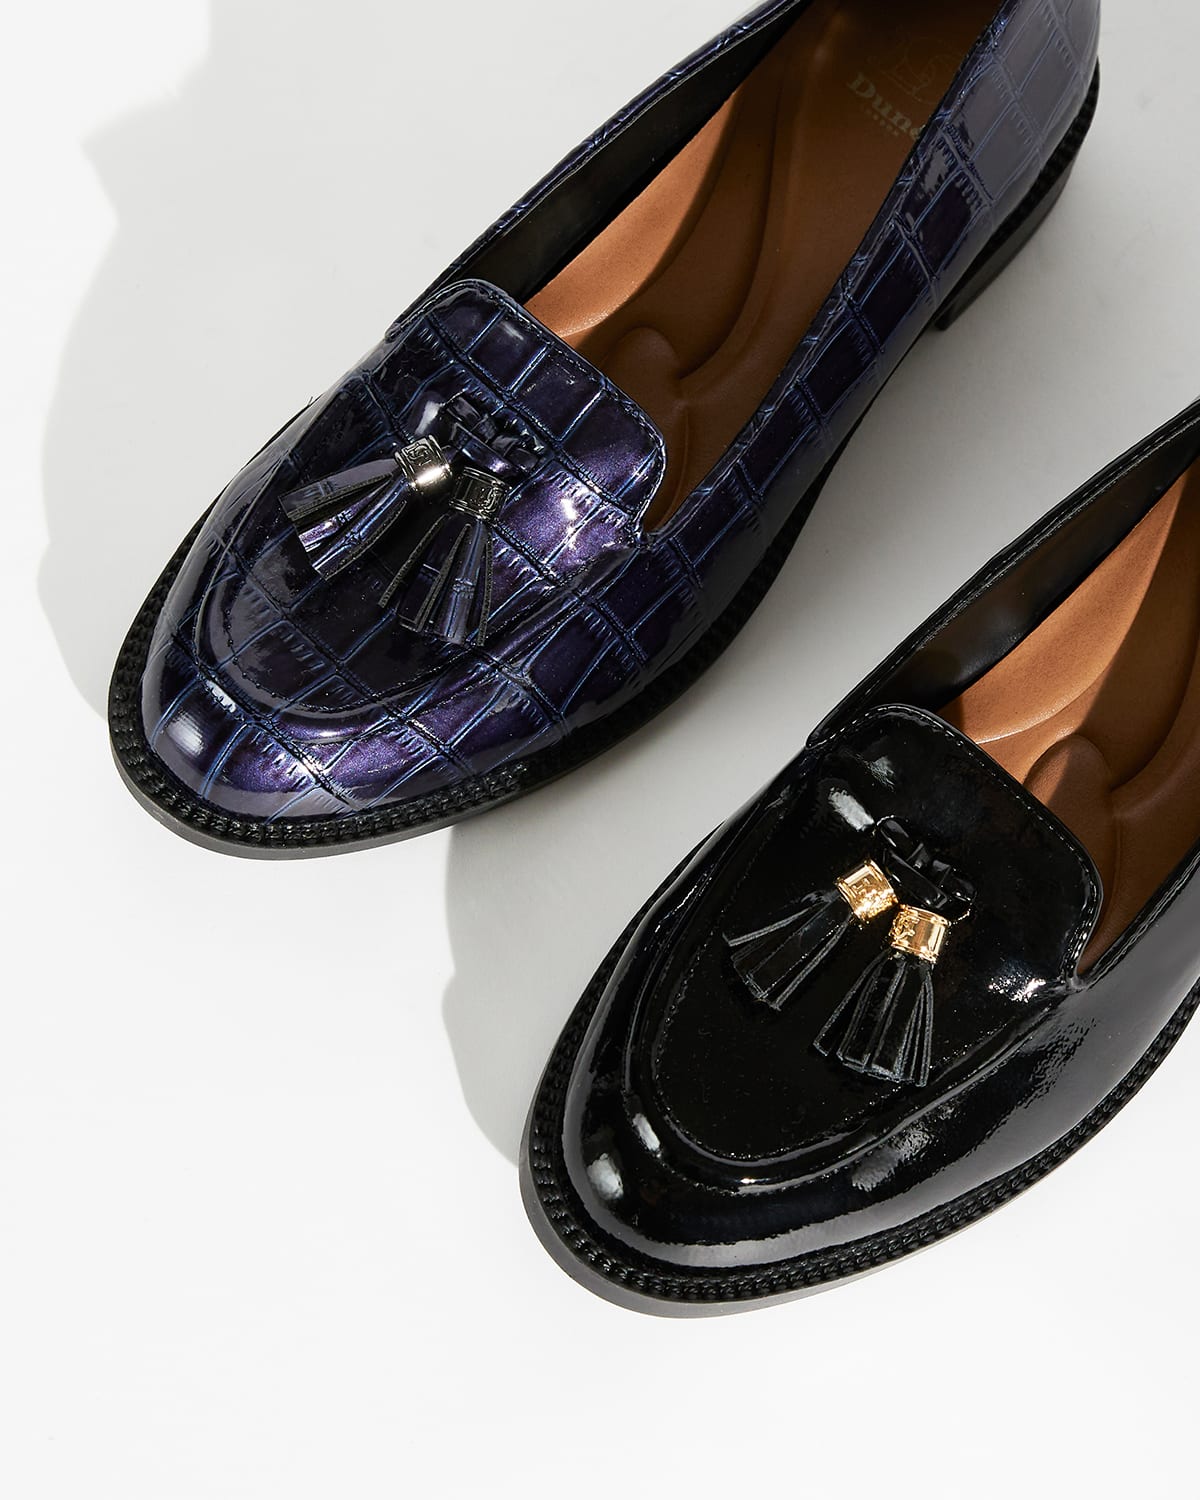 Key Loafer styles Image of our Global loafer